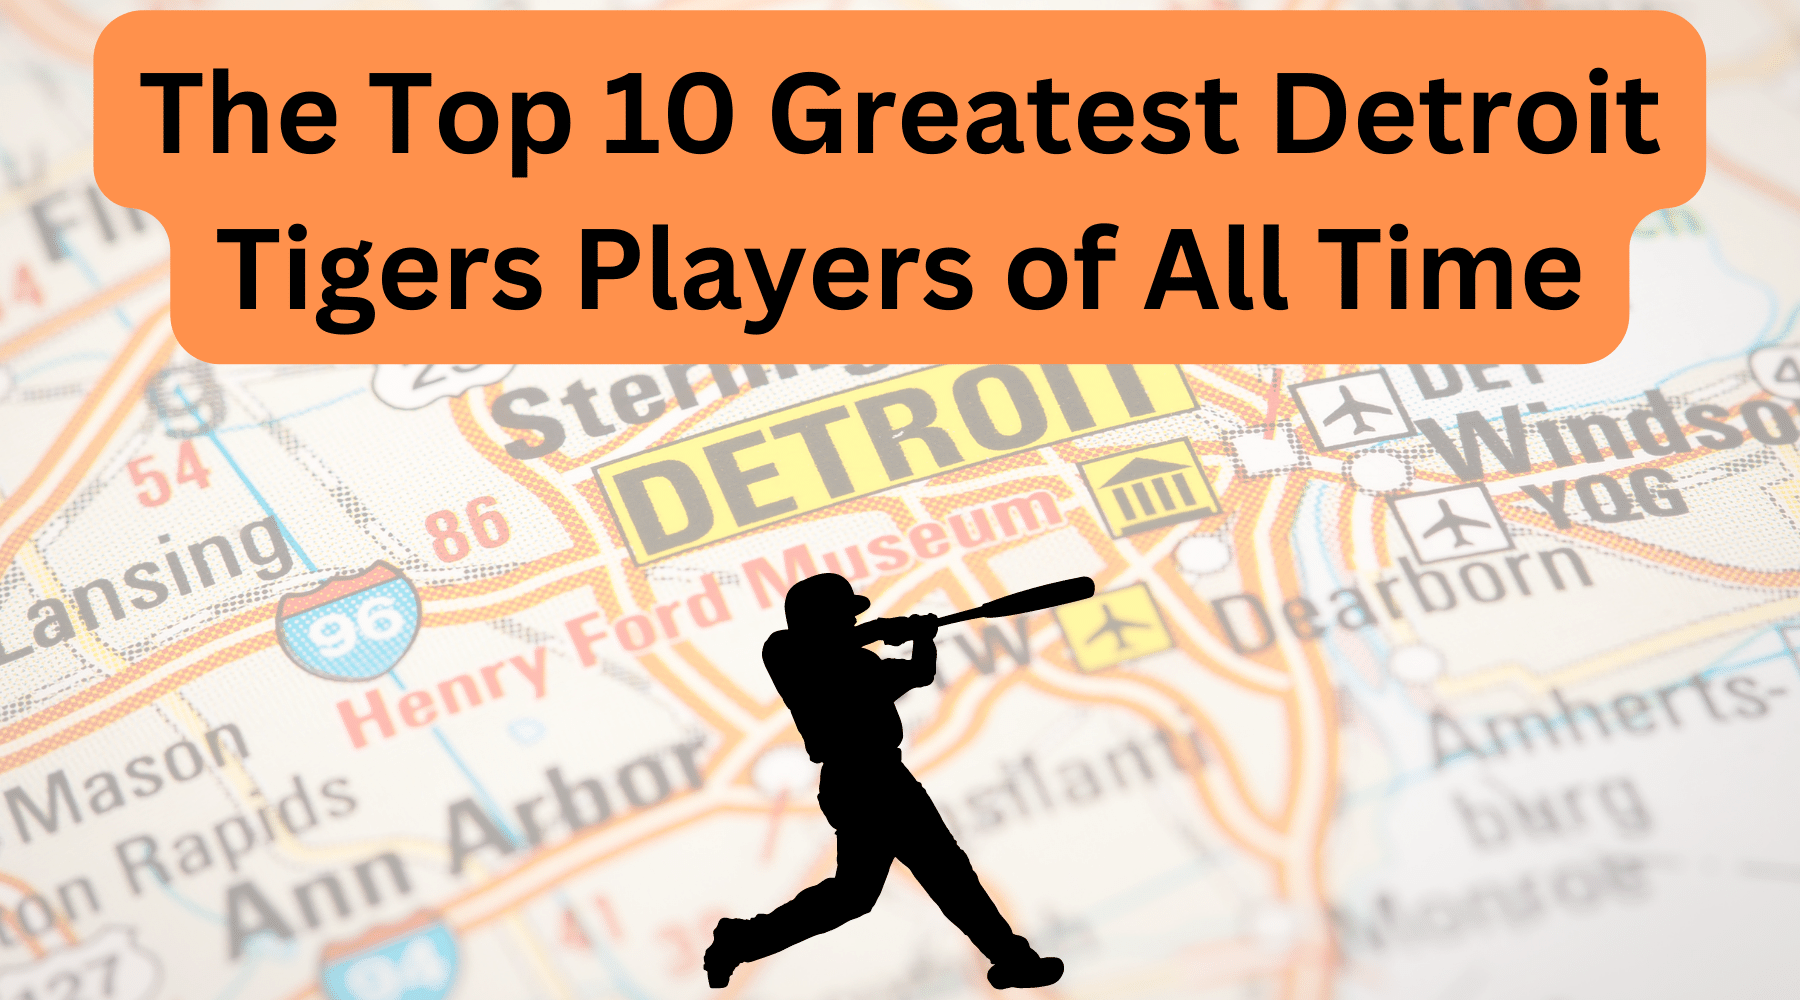 The Top 10 Greatest Detroit Tigers Players of All Time